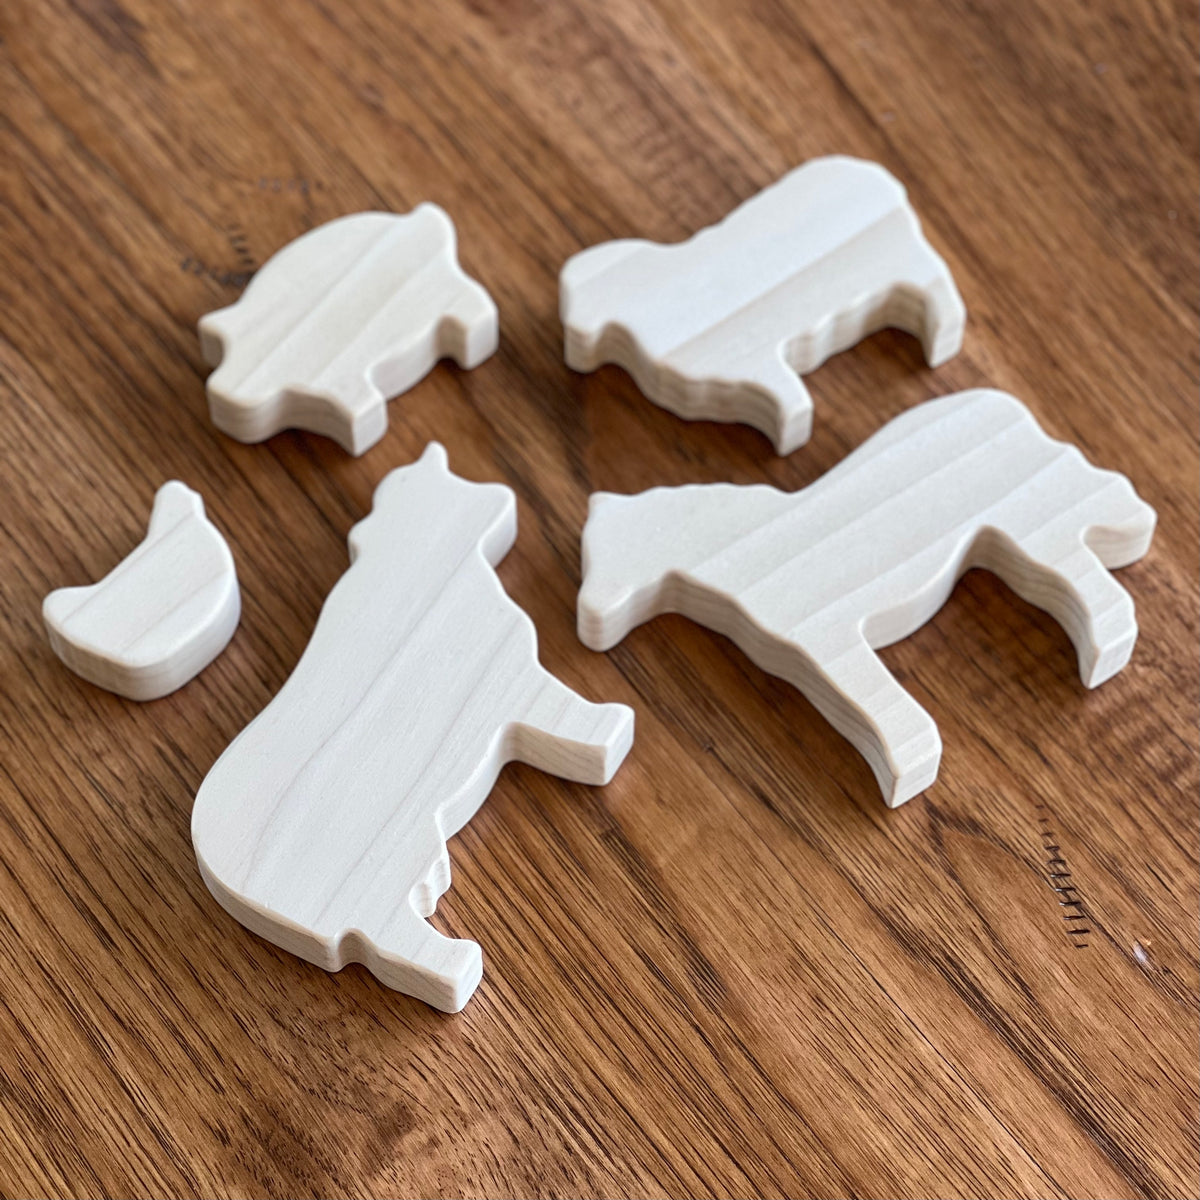 TO BE DISCONTINUED: Wooden Farm Animals Set